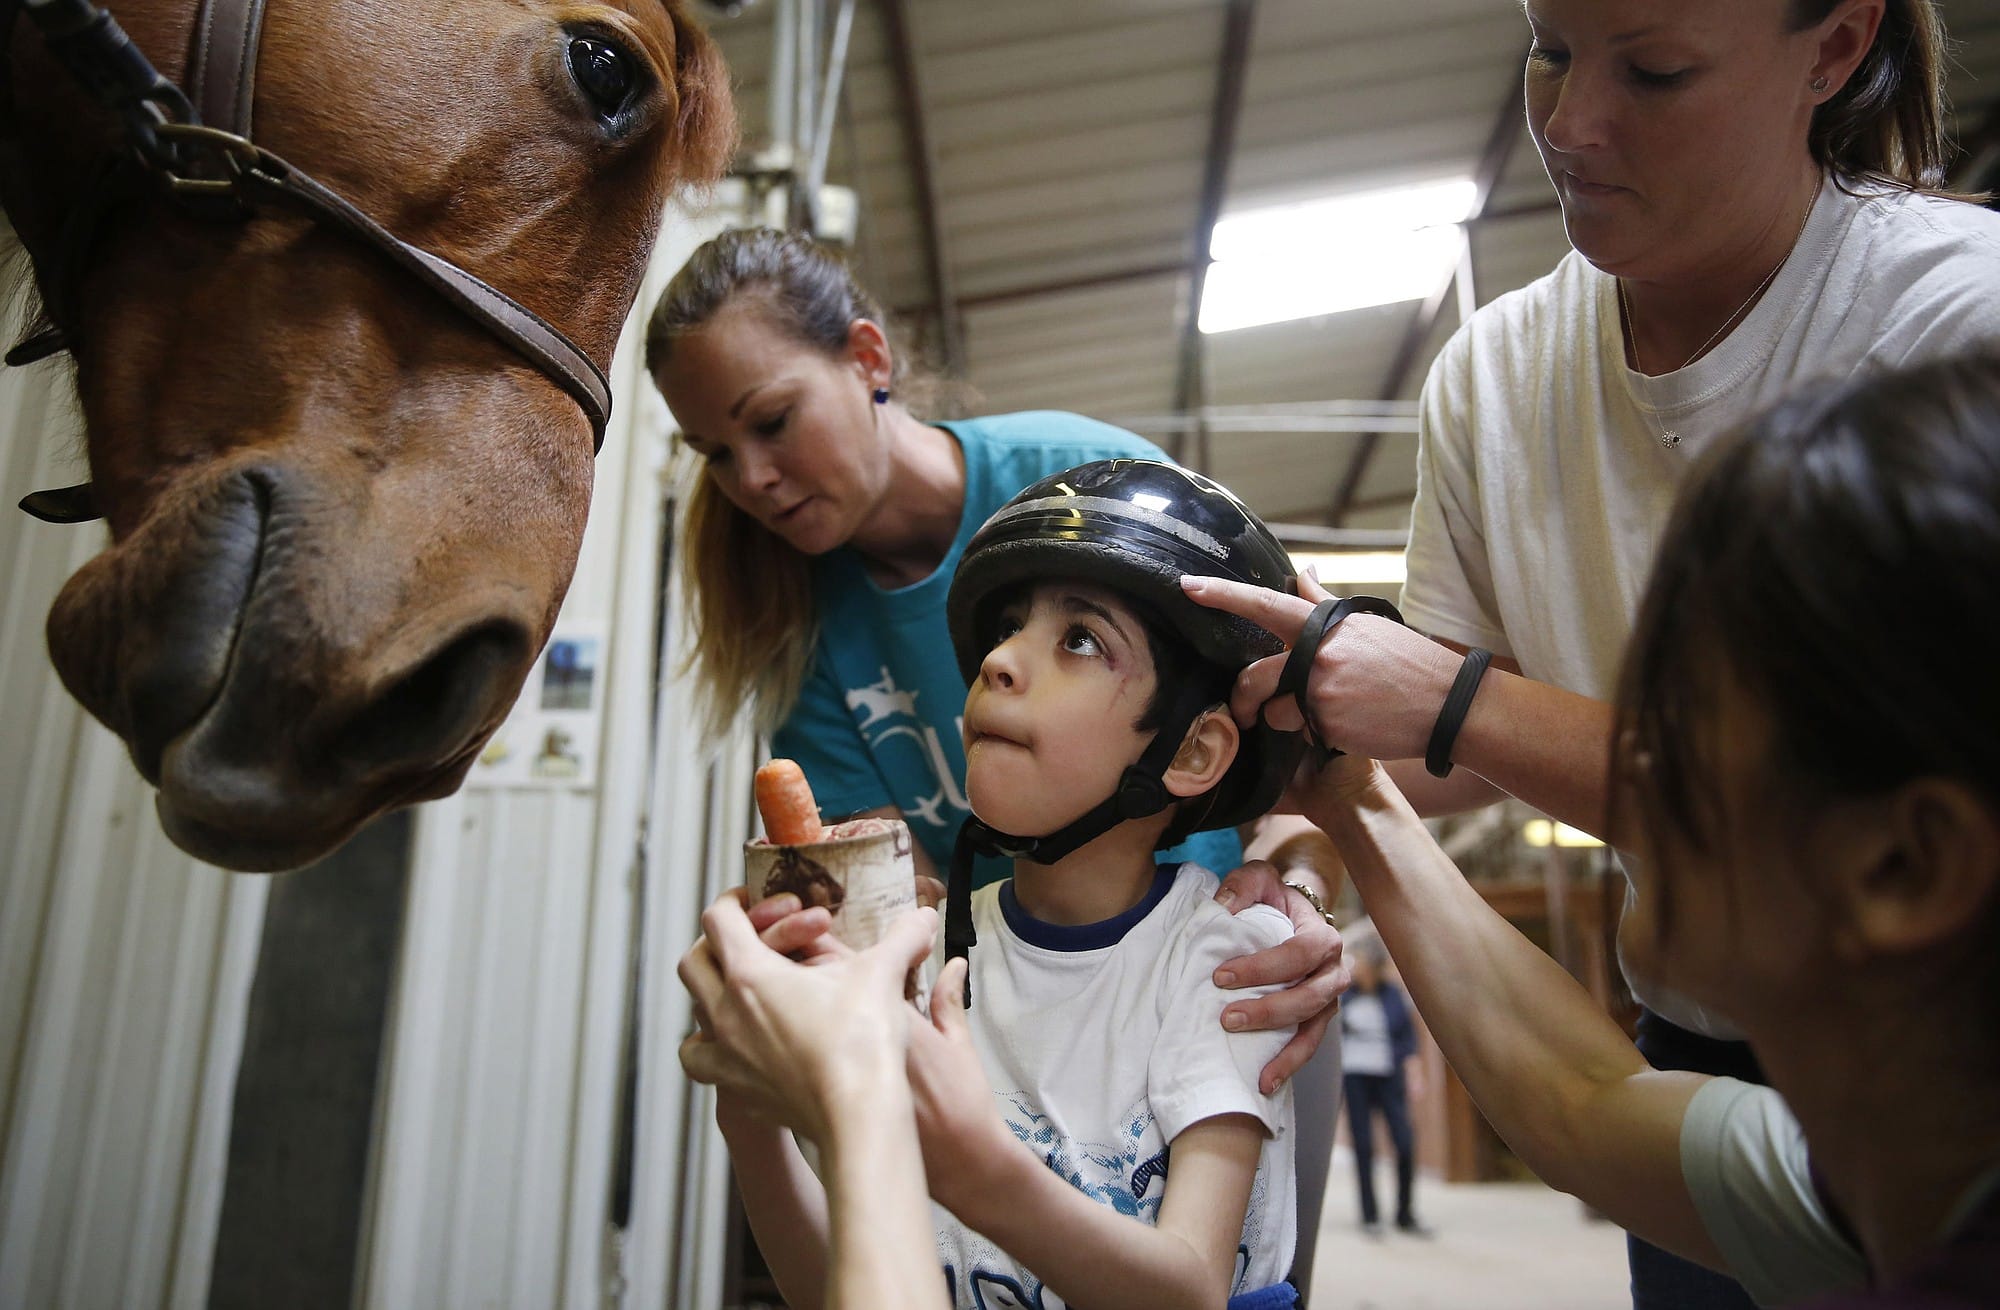 Clockwise from top left, Christa Collum, Megan Fishel, and therapist Kristi Immitt assist Jonathan Lopez, 7, of Rockwall, Texas, who has cerebral palsy, in feeding Patron a carrot during his hippotherapy session at Equest on March 31, 2015 in Rowlett, Texas. Lopez has been attending Equest for one year.